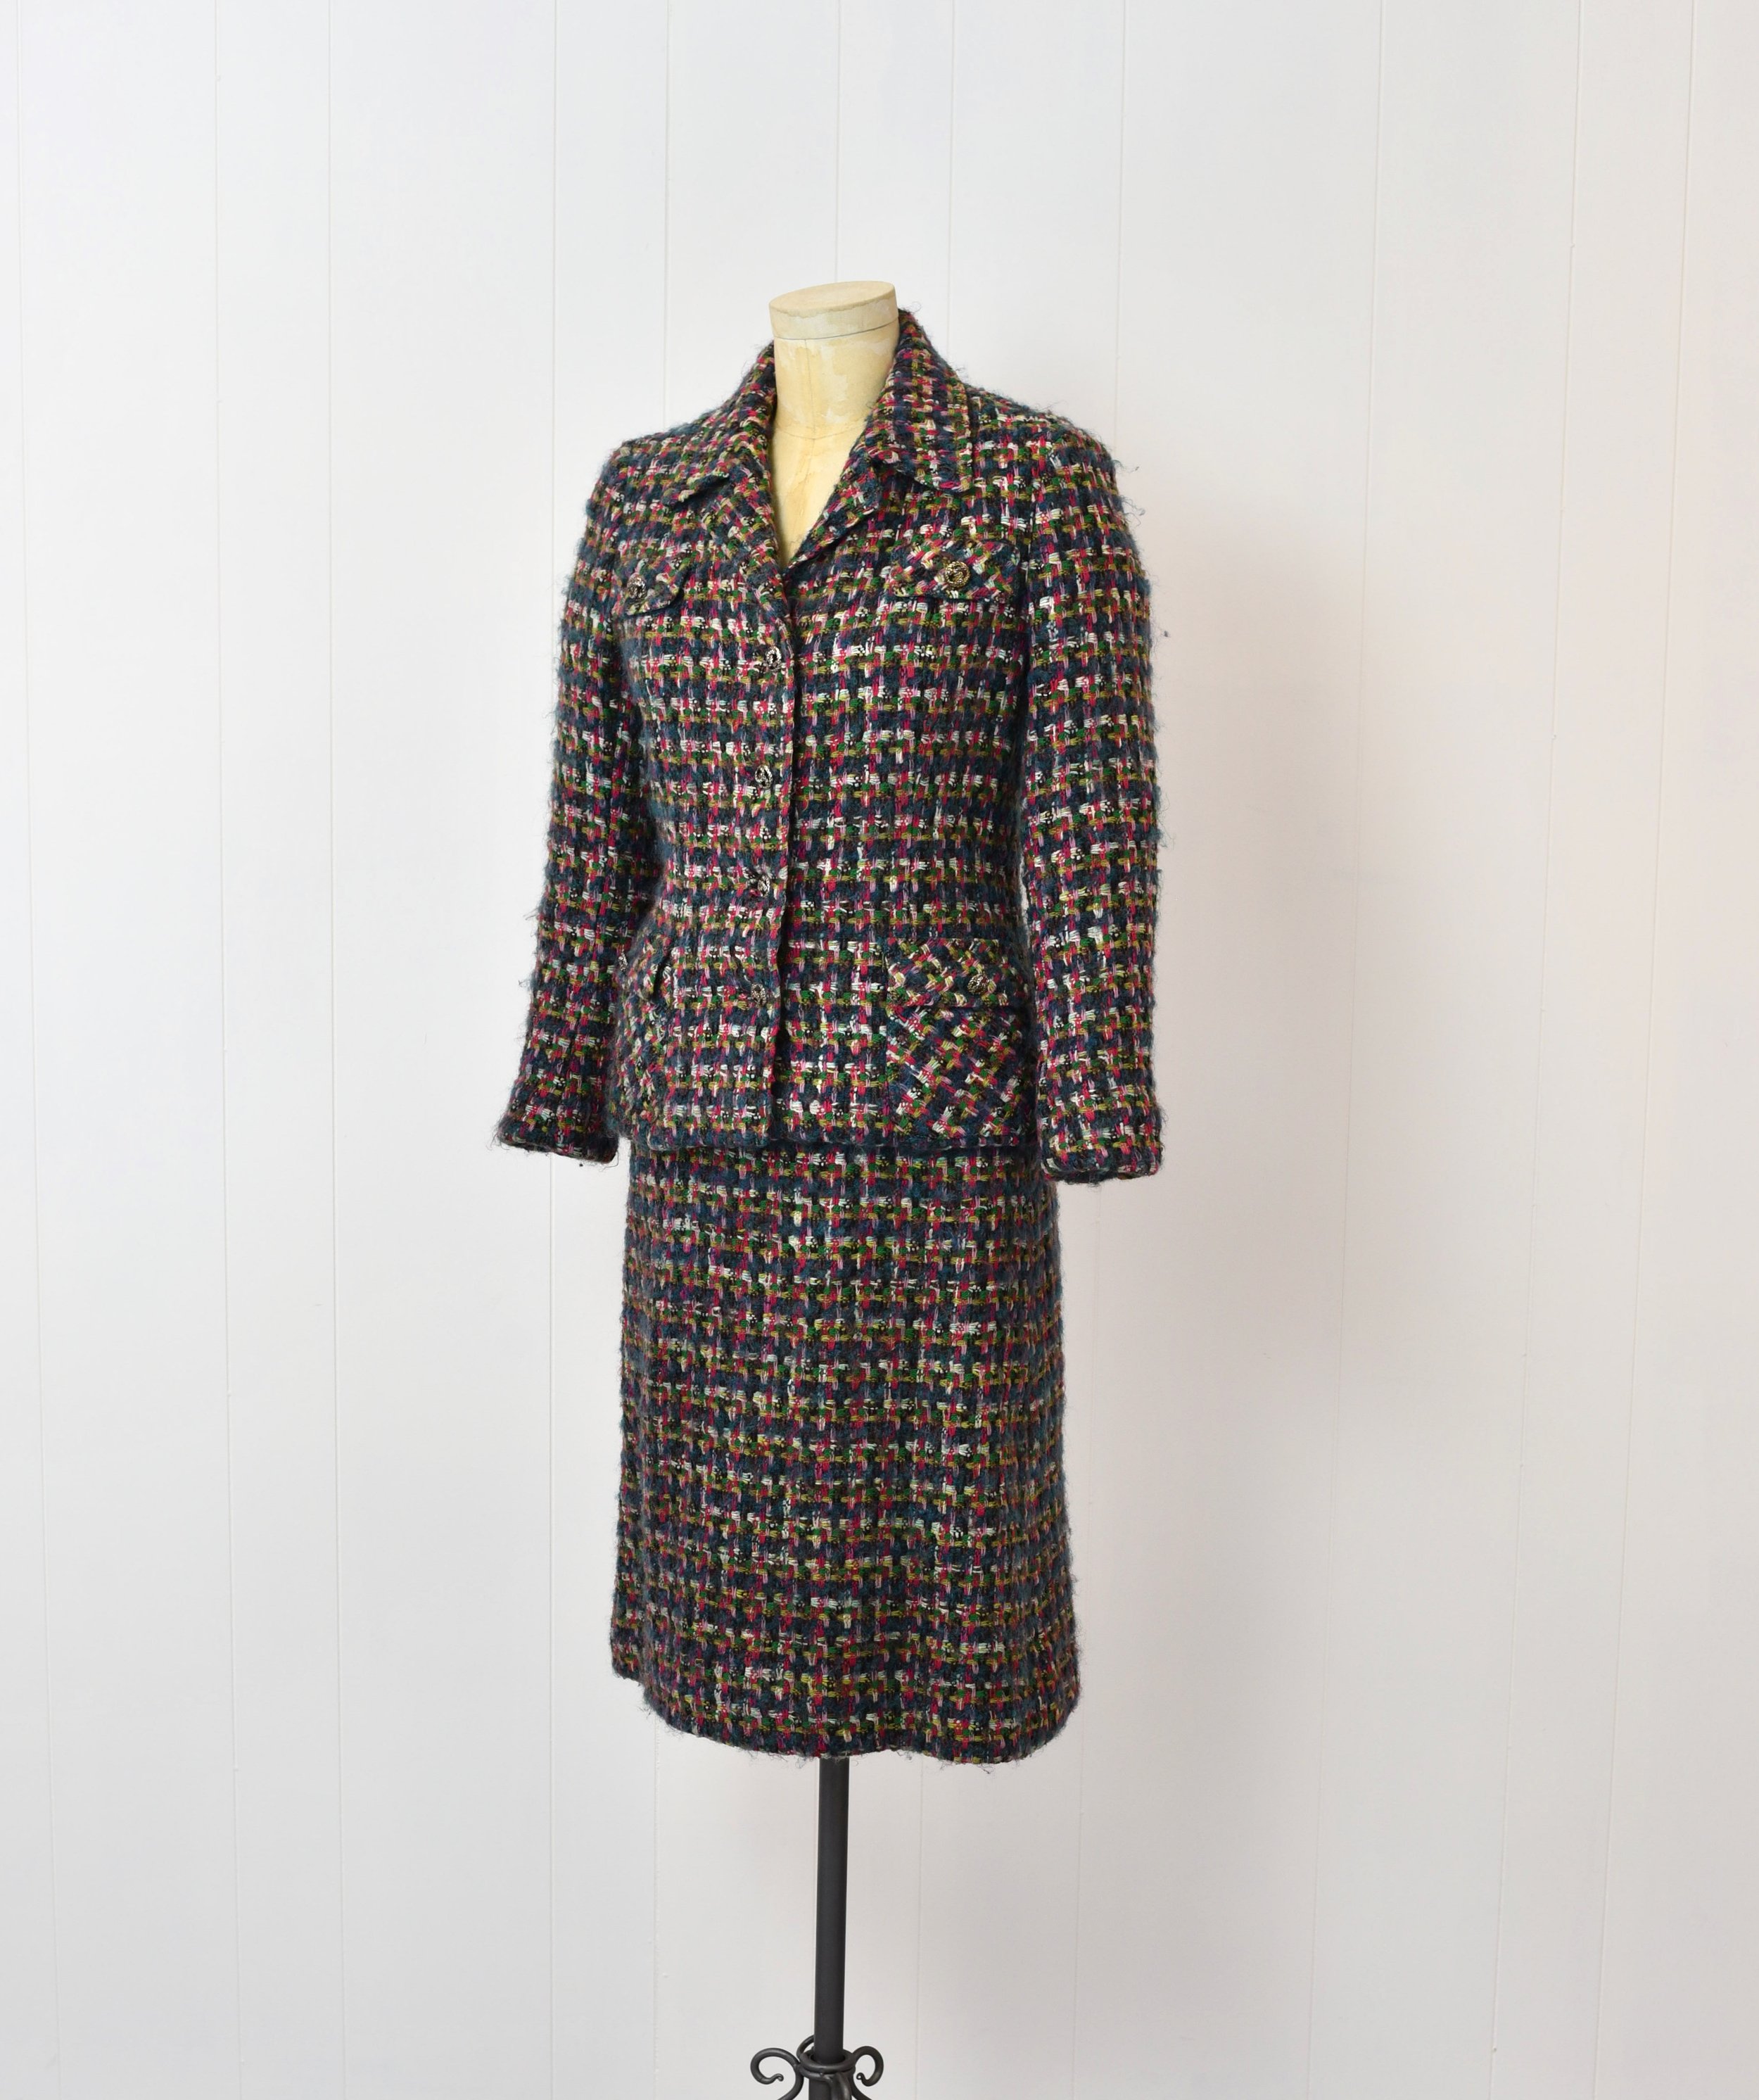 Plaid Tweed Suit Inspired by Chanel, fashion